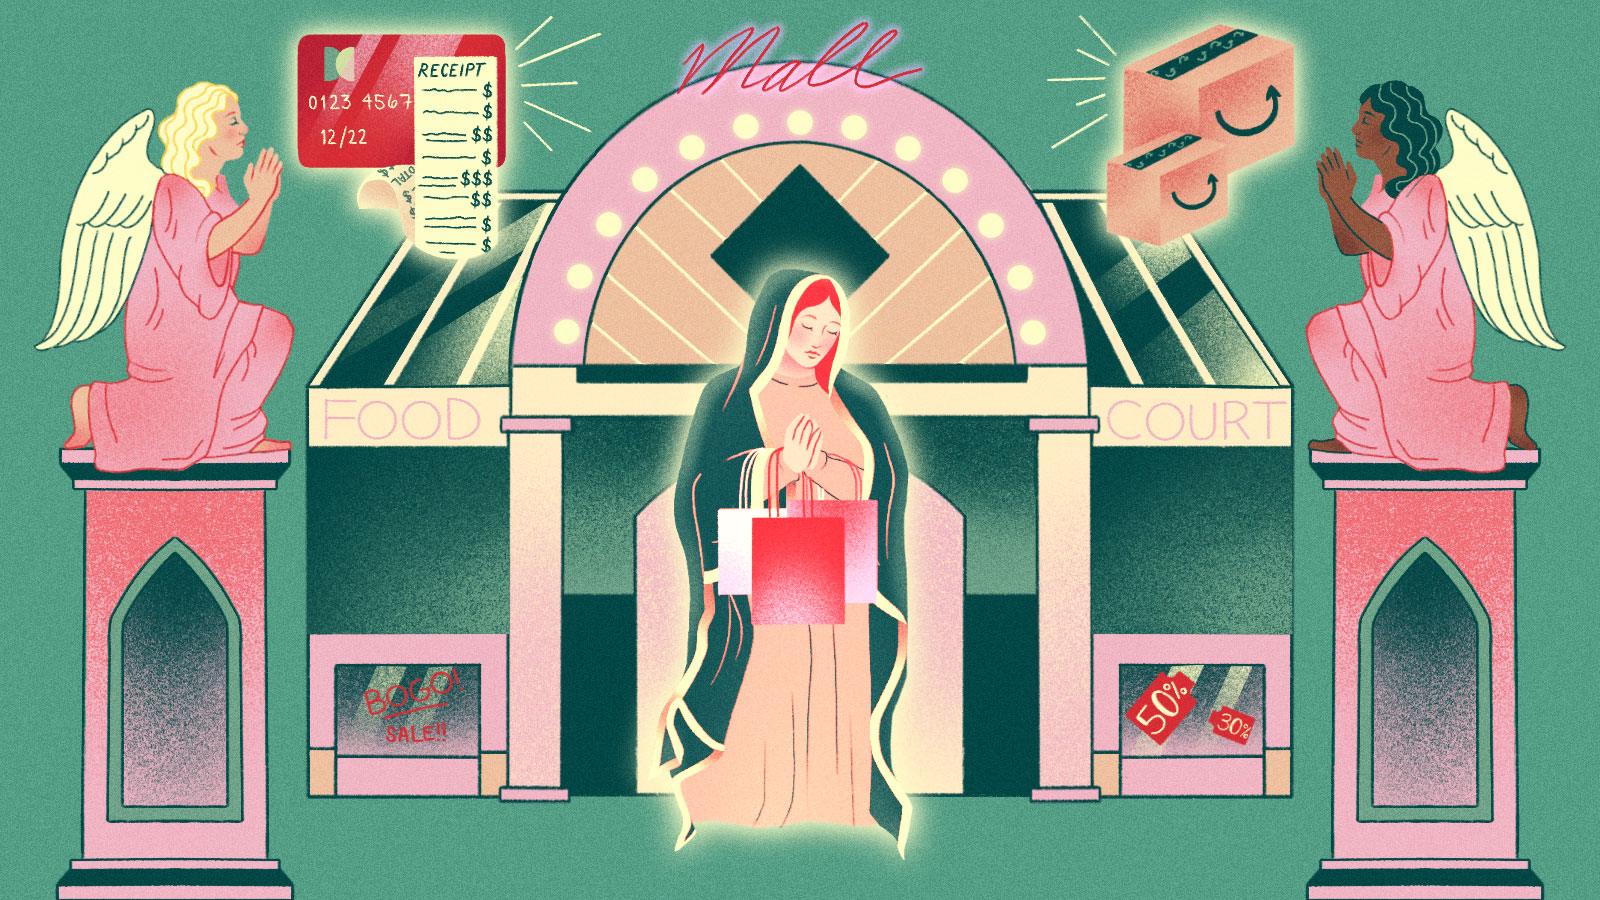 Illustration: two angels flanking a Virgin Mary figure holding shopping bags, exiting a mall